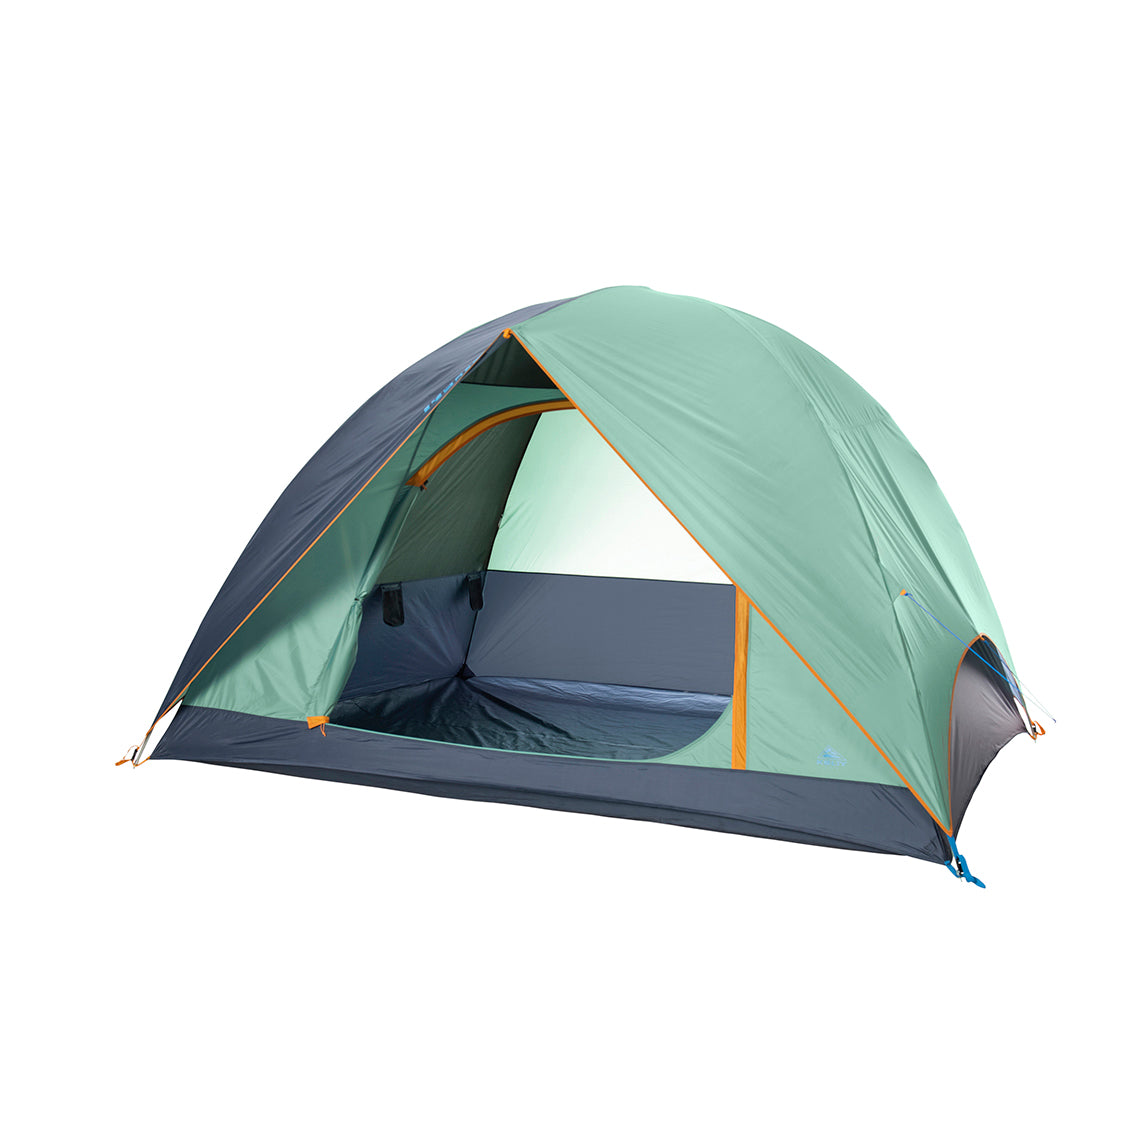 kelty tallboy 6 person tent fly on and open front view in color light teal with orange accents